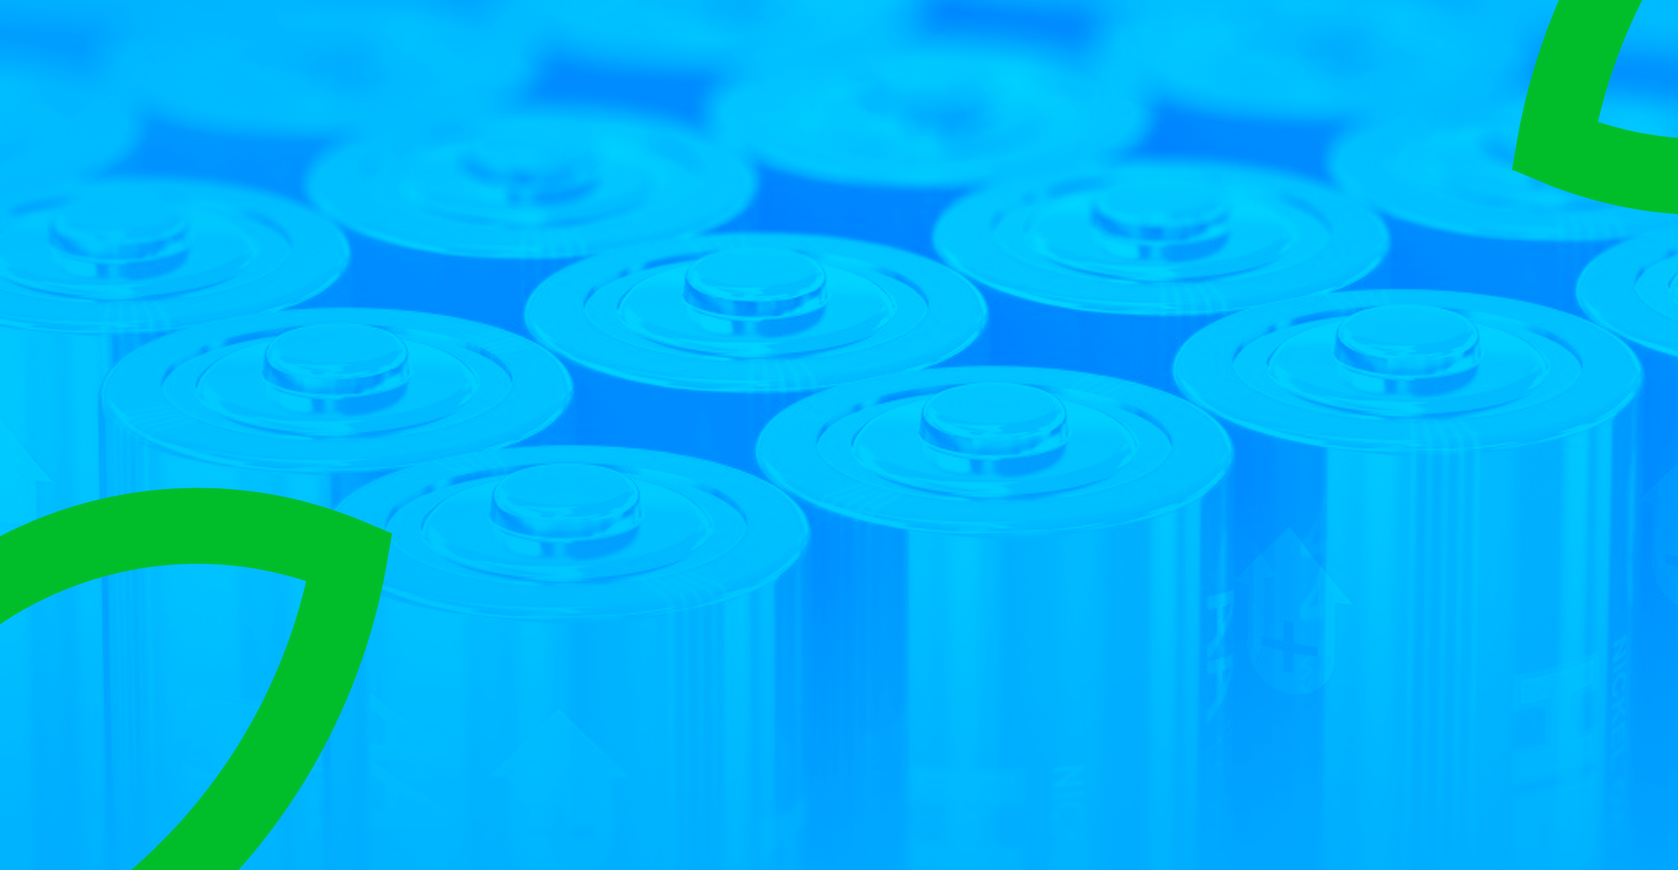 Reuse and recycling of lithium batteries